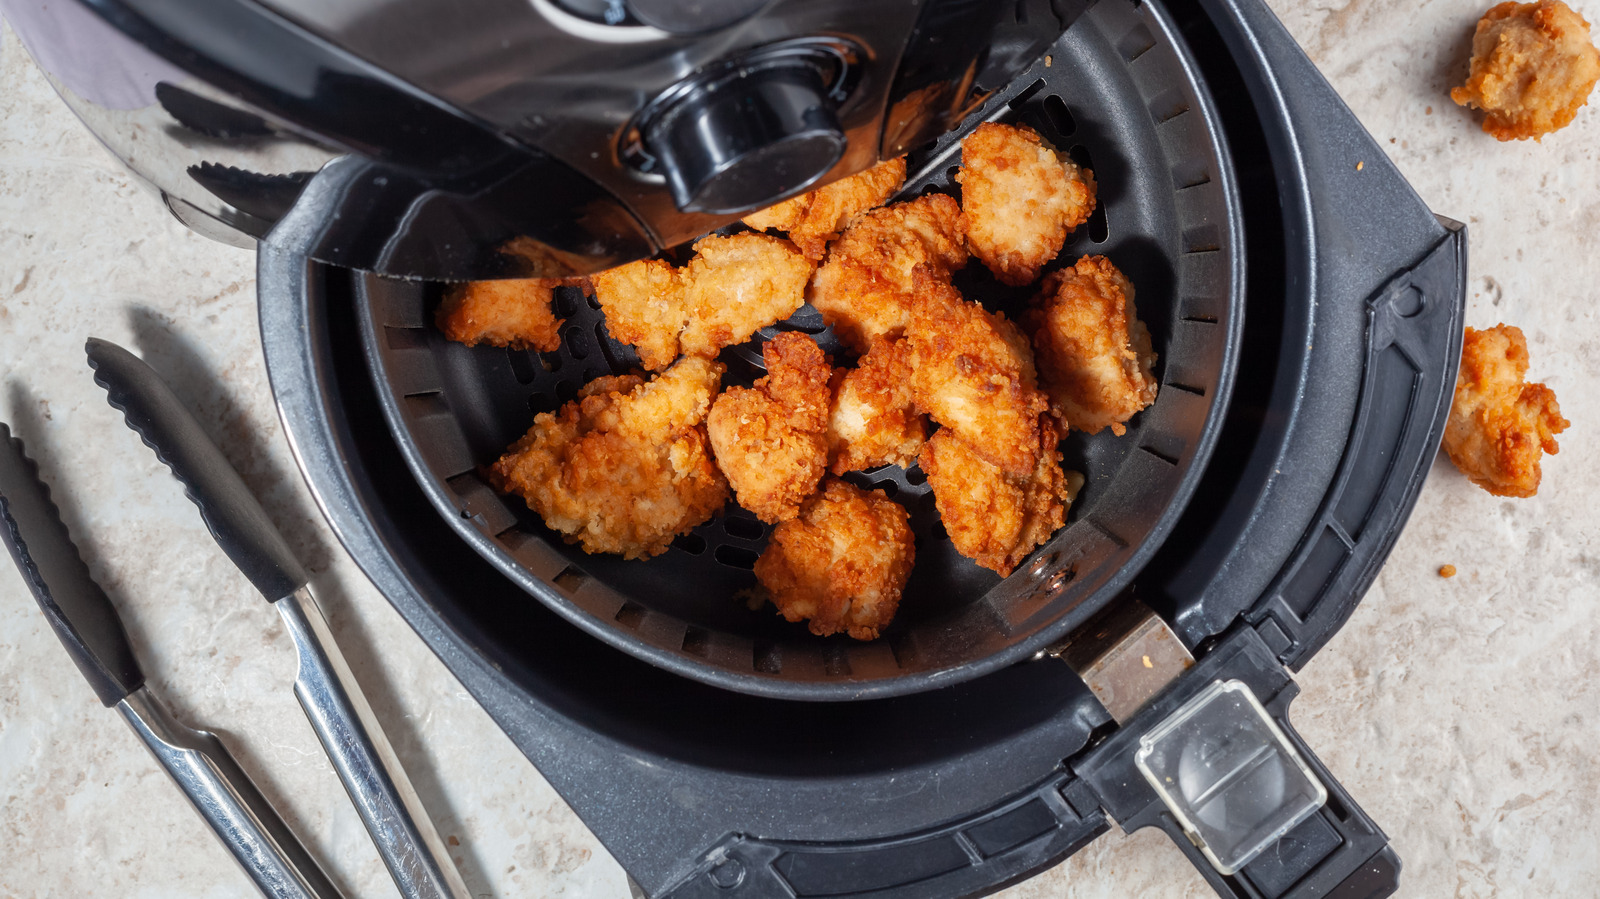 https://www.tastingtable.com/img/gallery/the-biggest-mistakes-youre-making-with-your-air-fryer/l-intro-1642519180.jpg